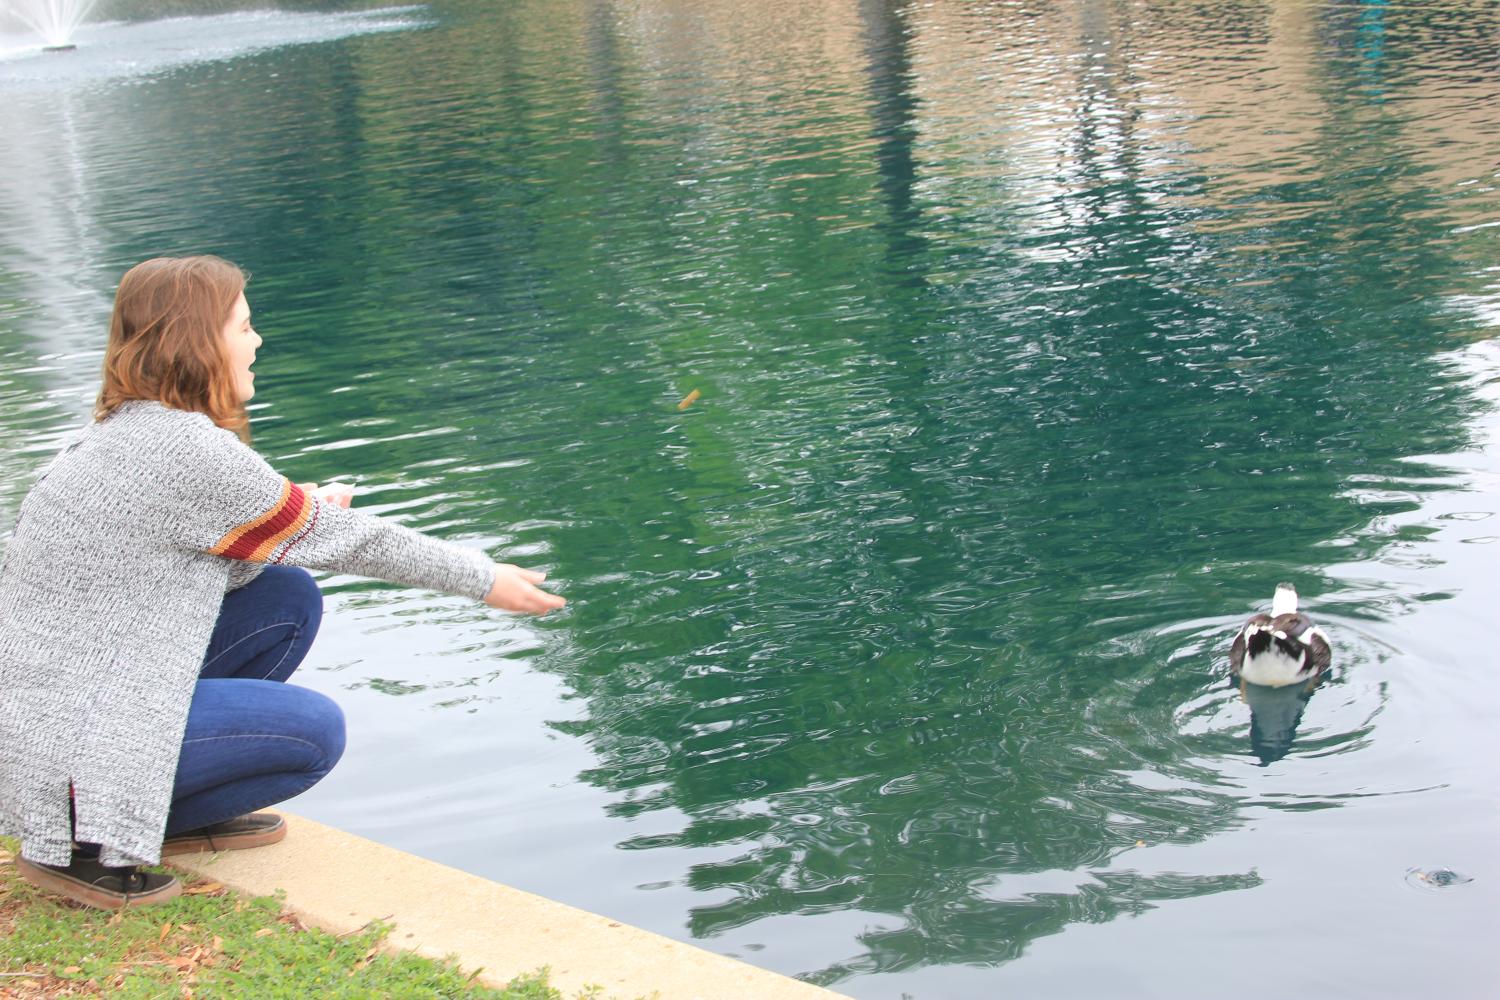 Junior Elizabeth Bell (top left)enjoys some free time by the pond feeding a duck.